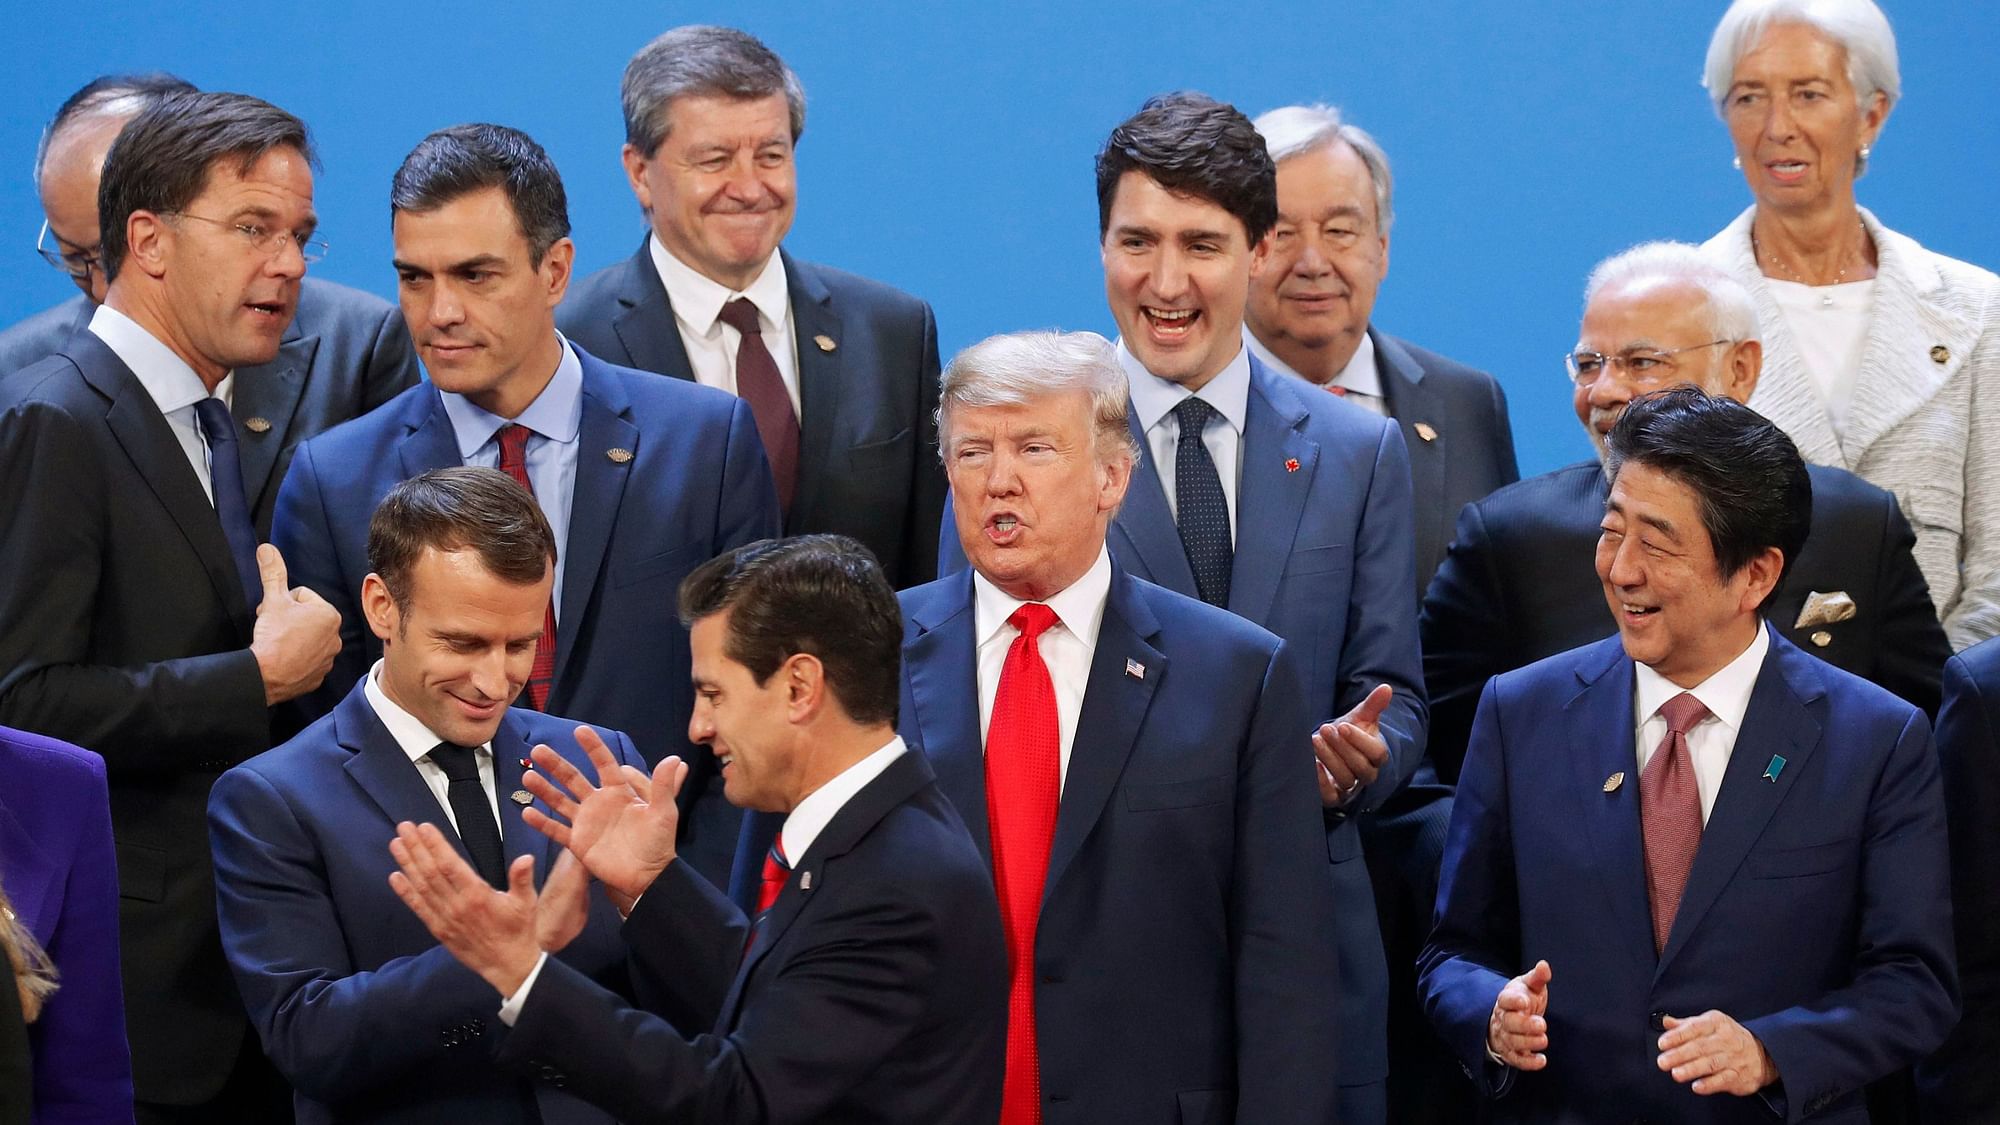 US President Donald Trump and other heads of state react to Mexico’s President Enrique Pena Neto being the last one to arrive for the family photo at the G20 summit on 30 November.